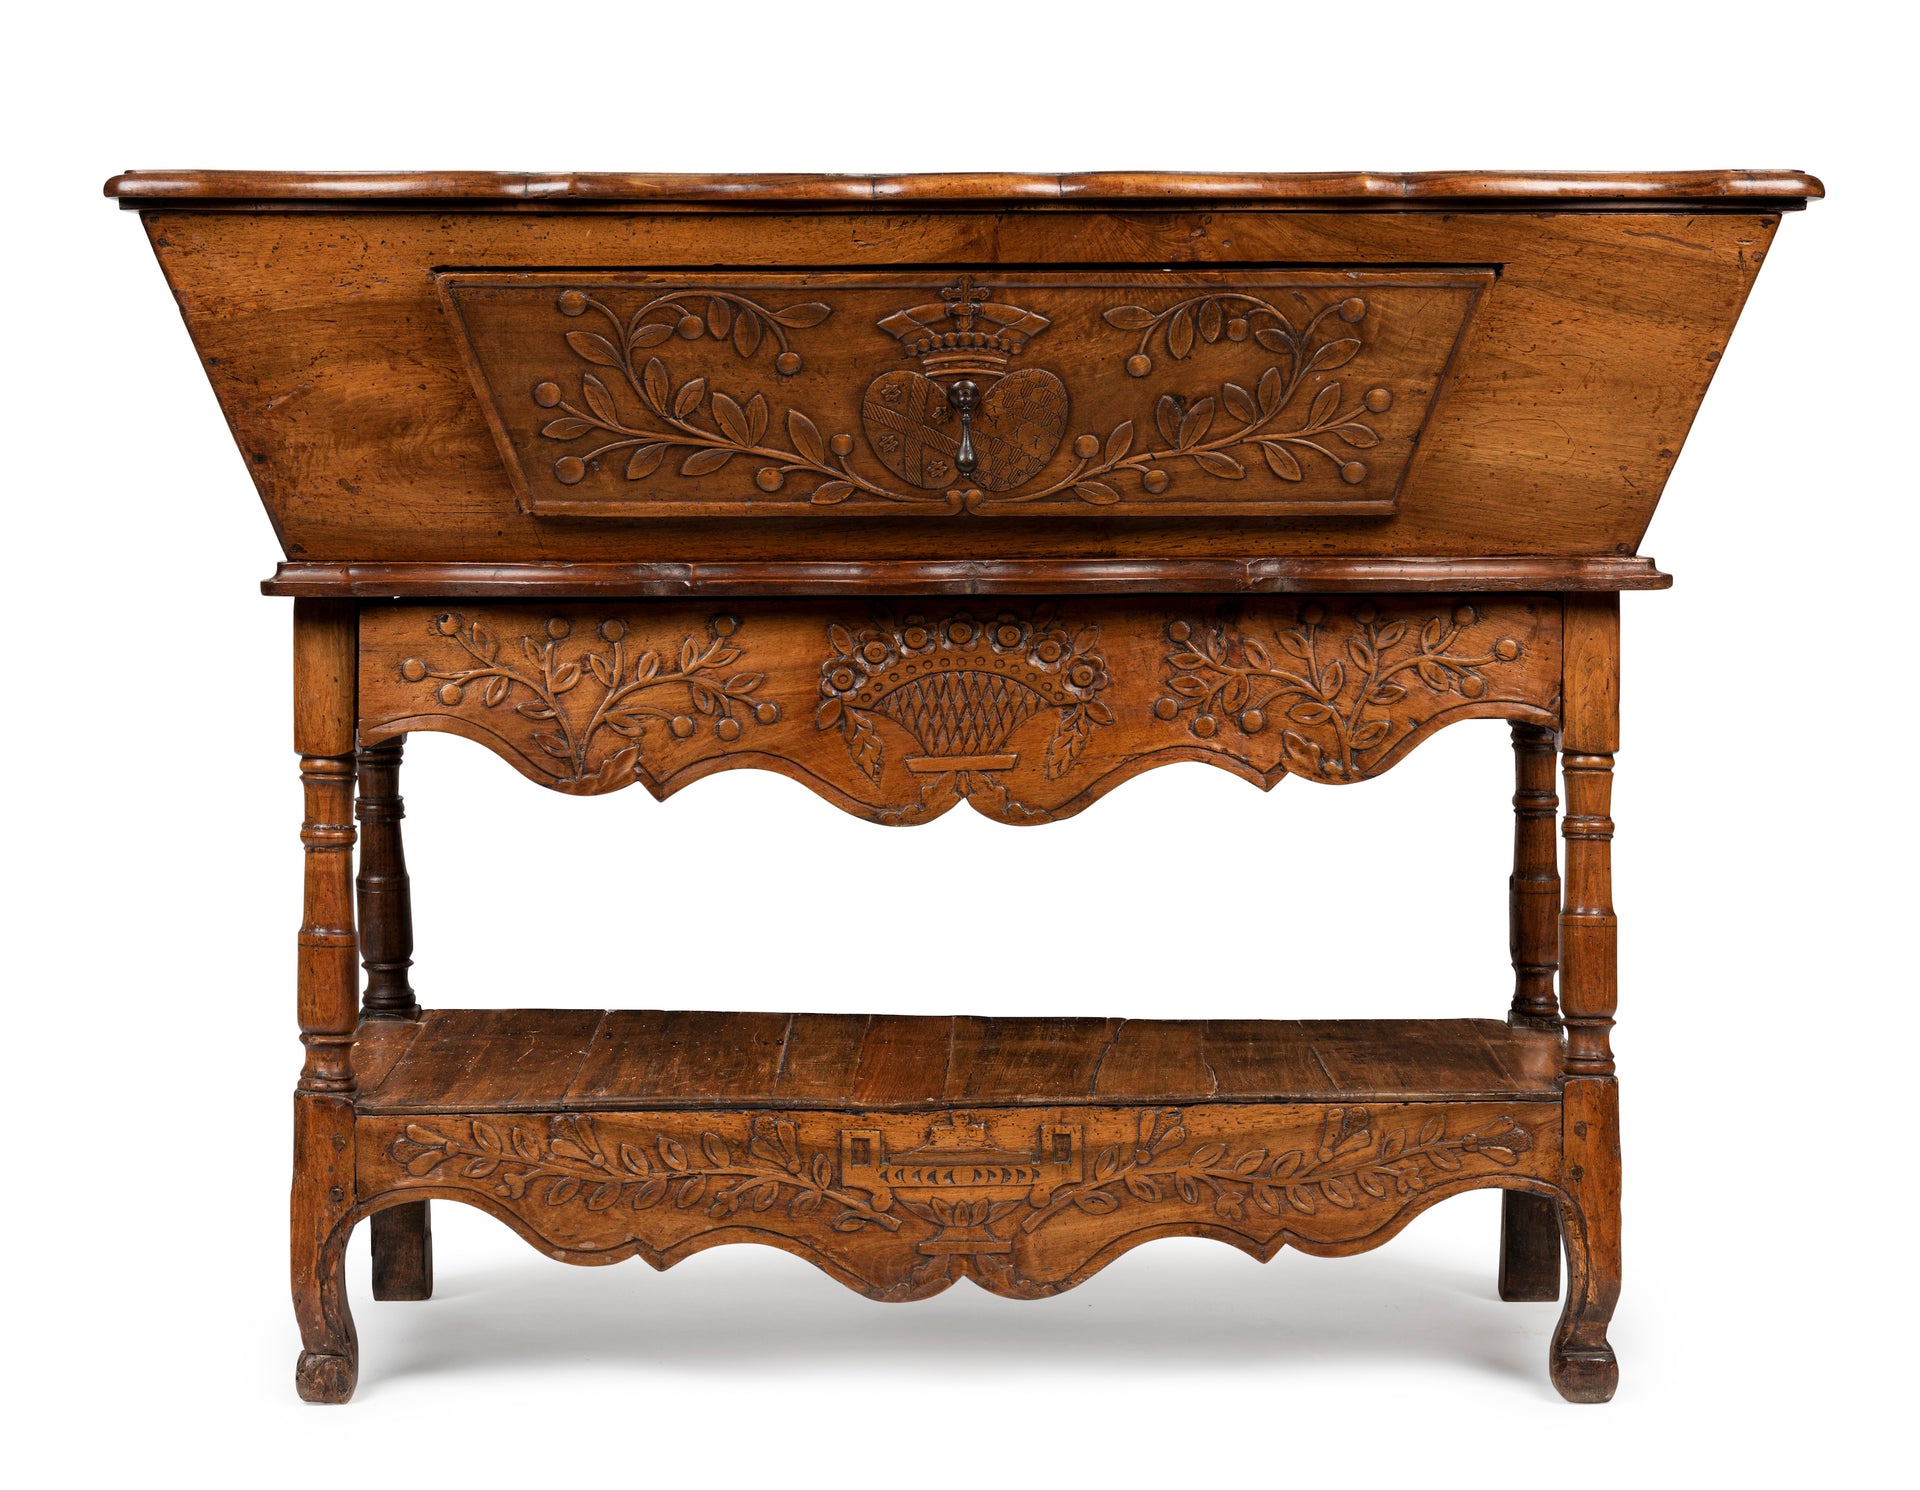 SOLD A beautifully carved walnut and fruitwood dough bin, French 18th Century